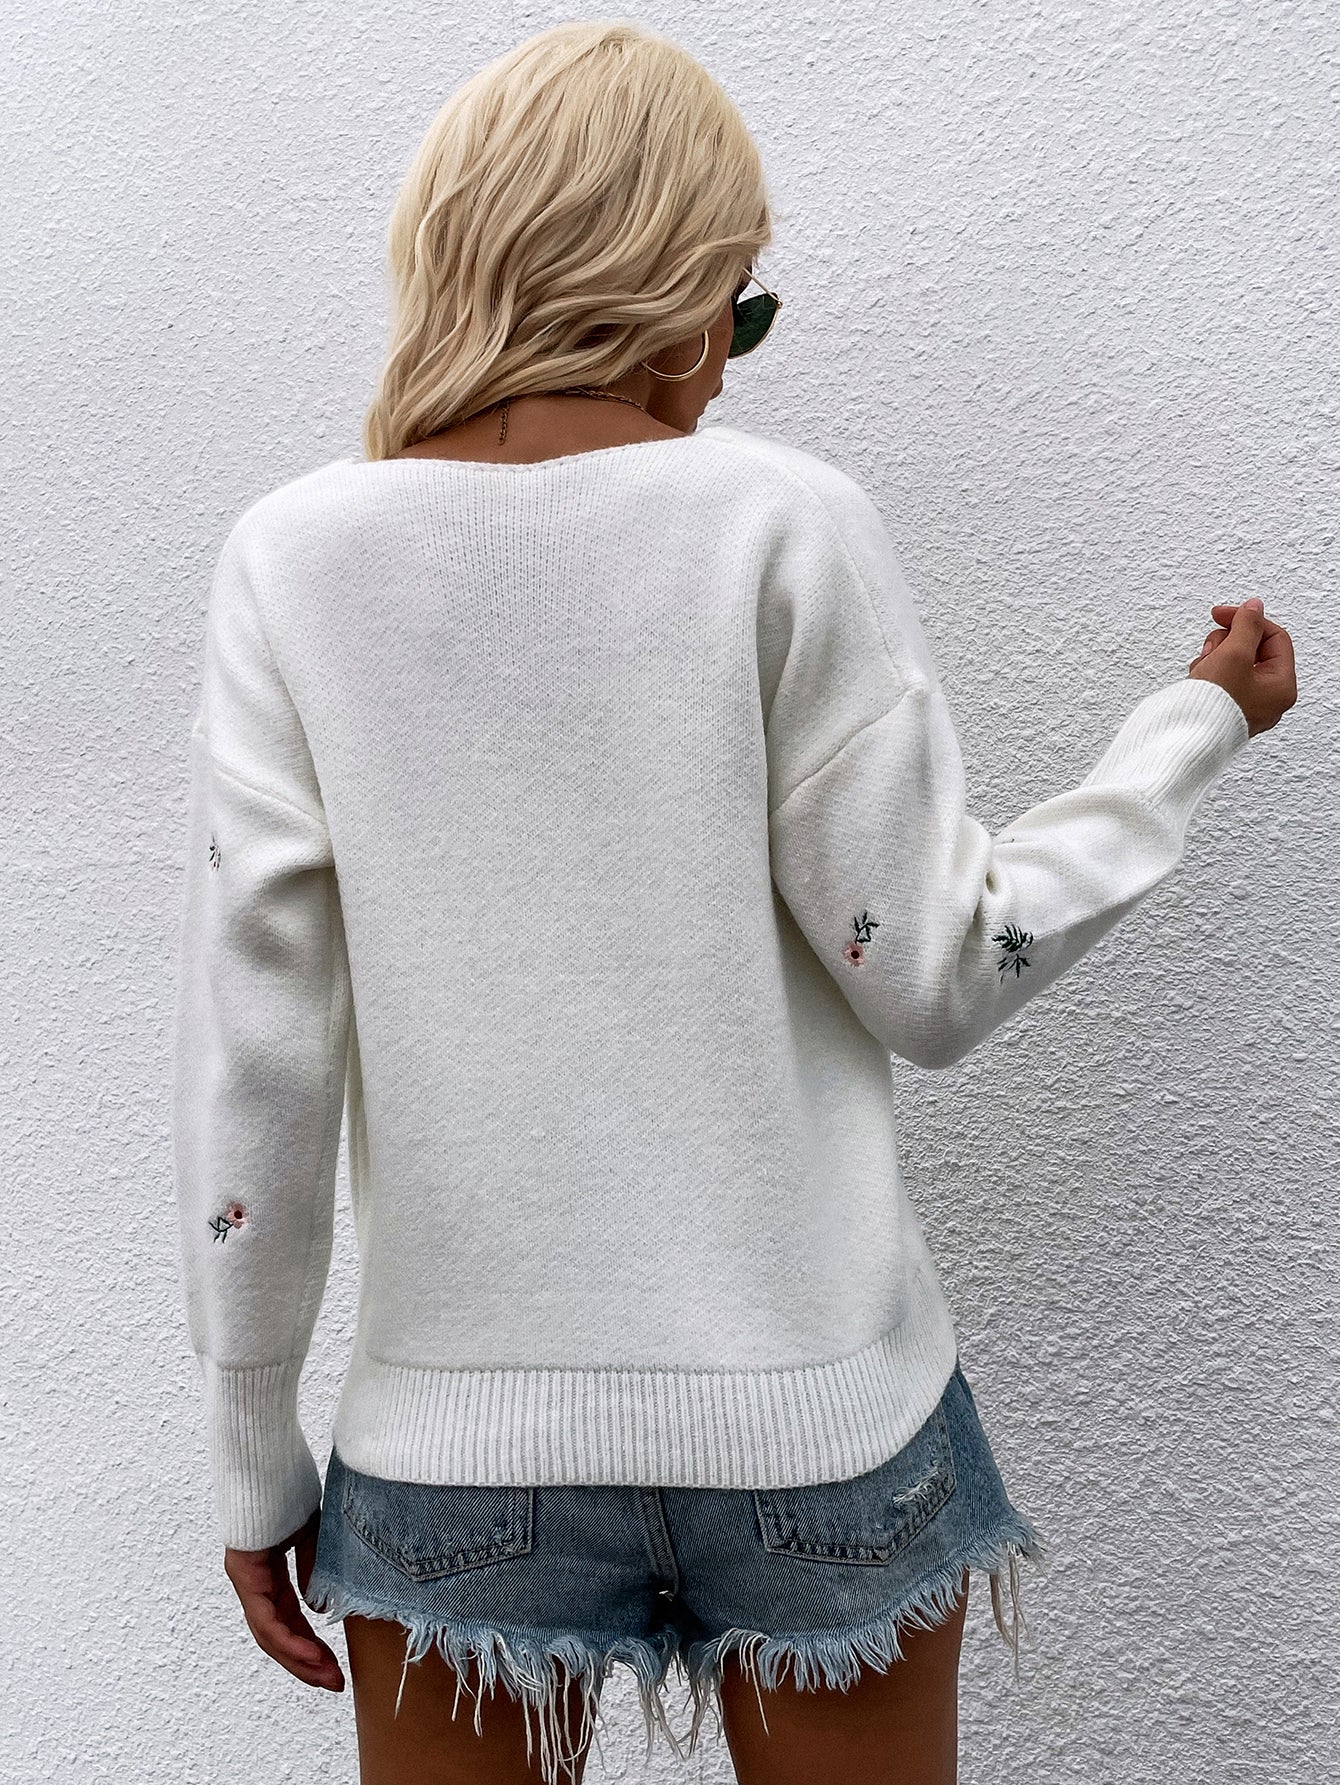 Floral Embroidery V-Neck Sweater